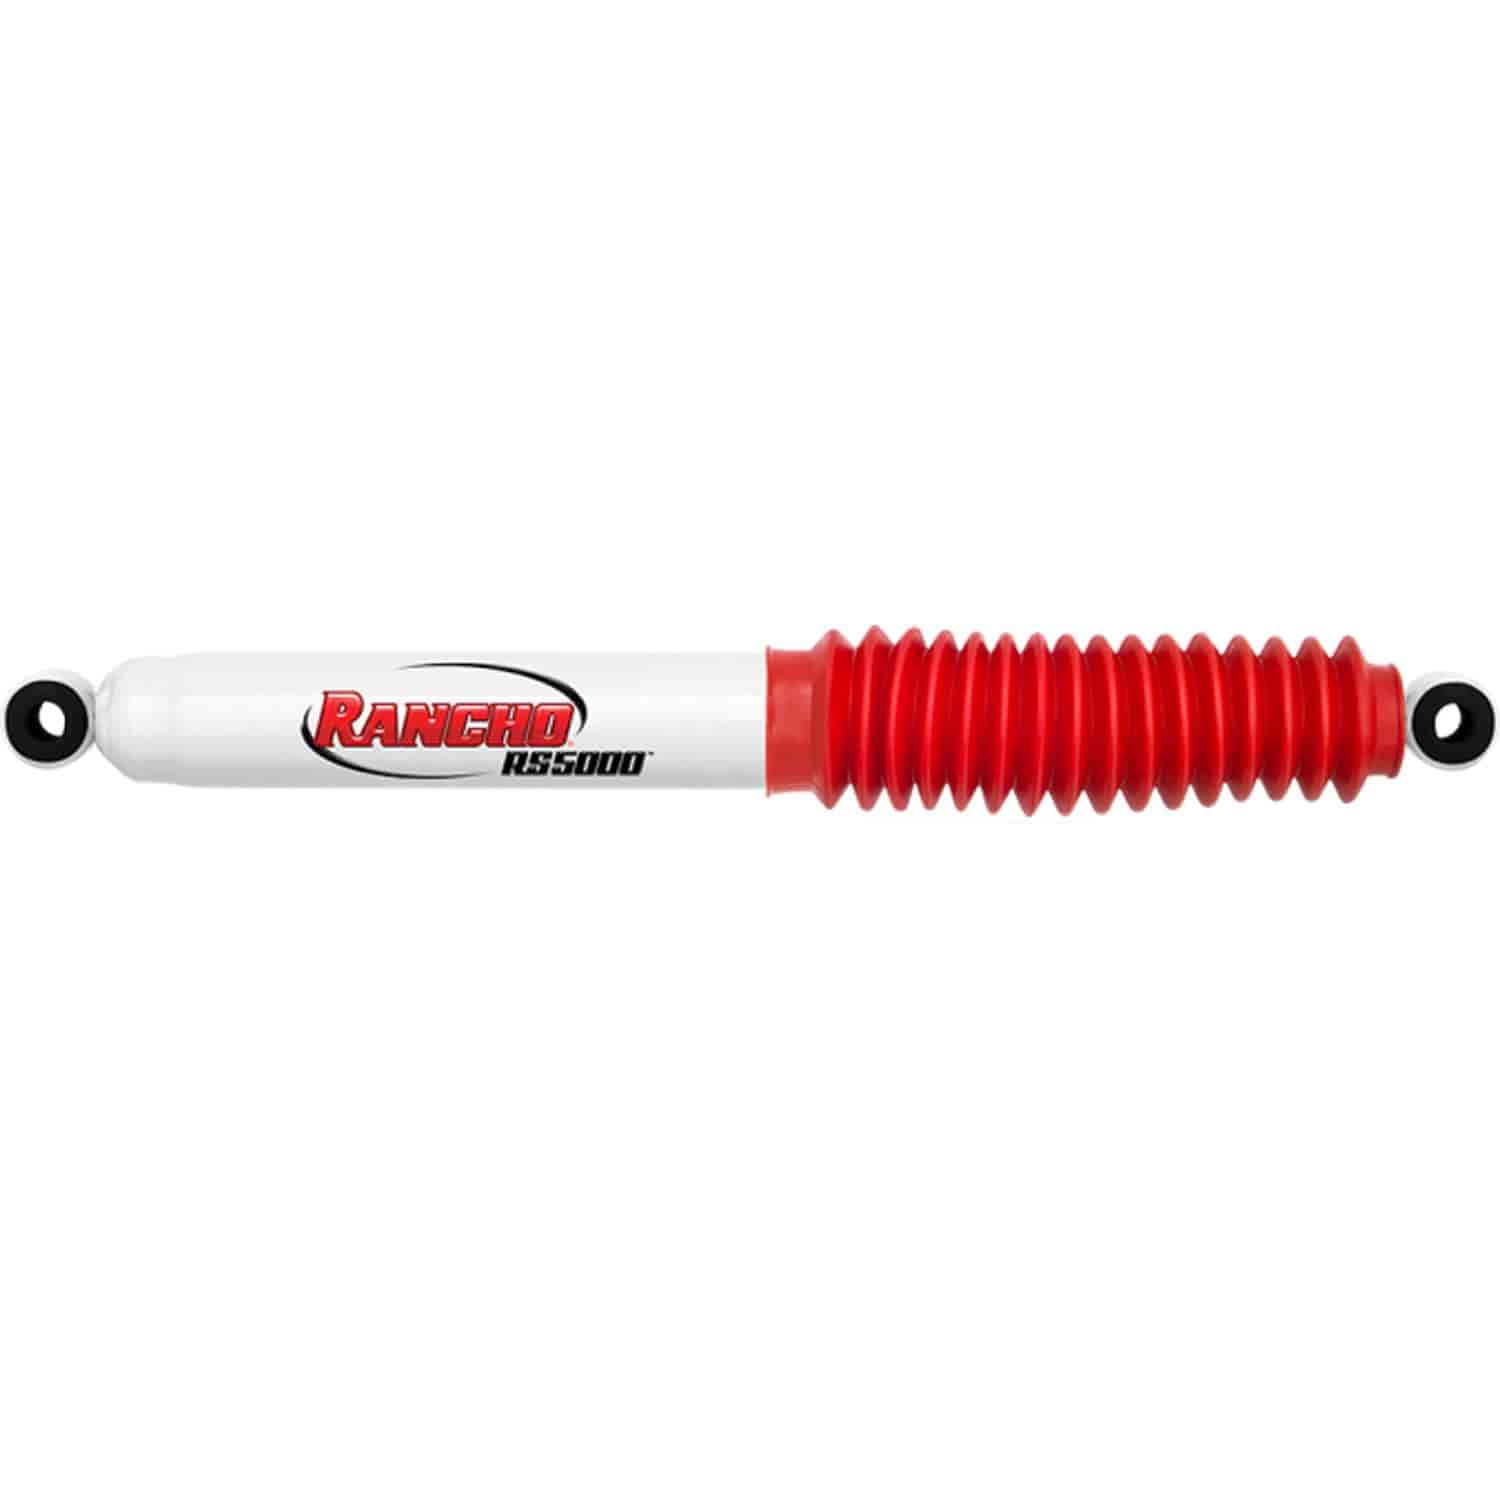 RS5000 Rear Shock Absorber Fits for Nissan Xterra